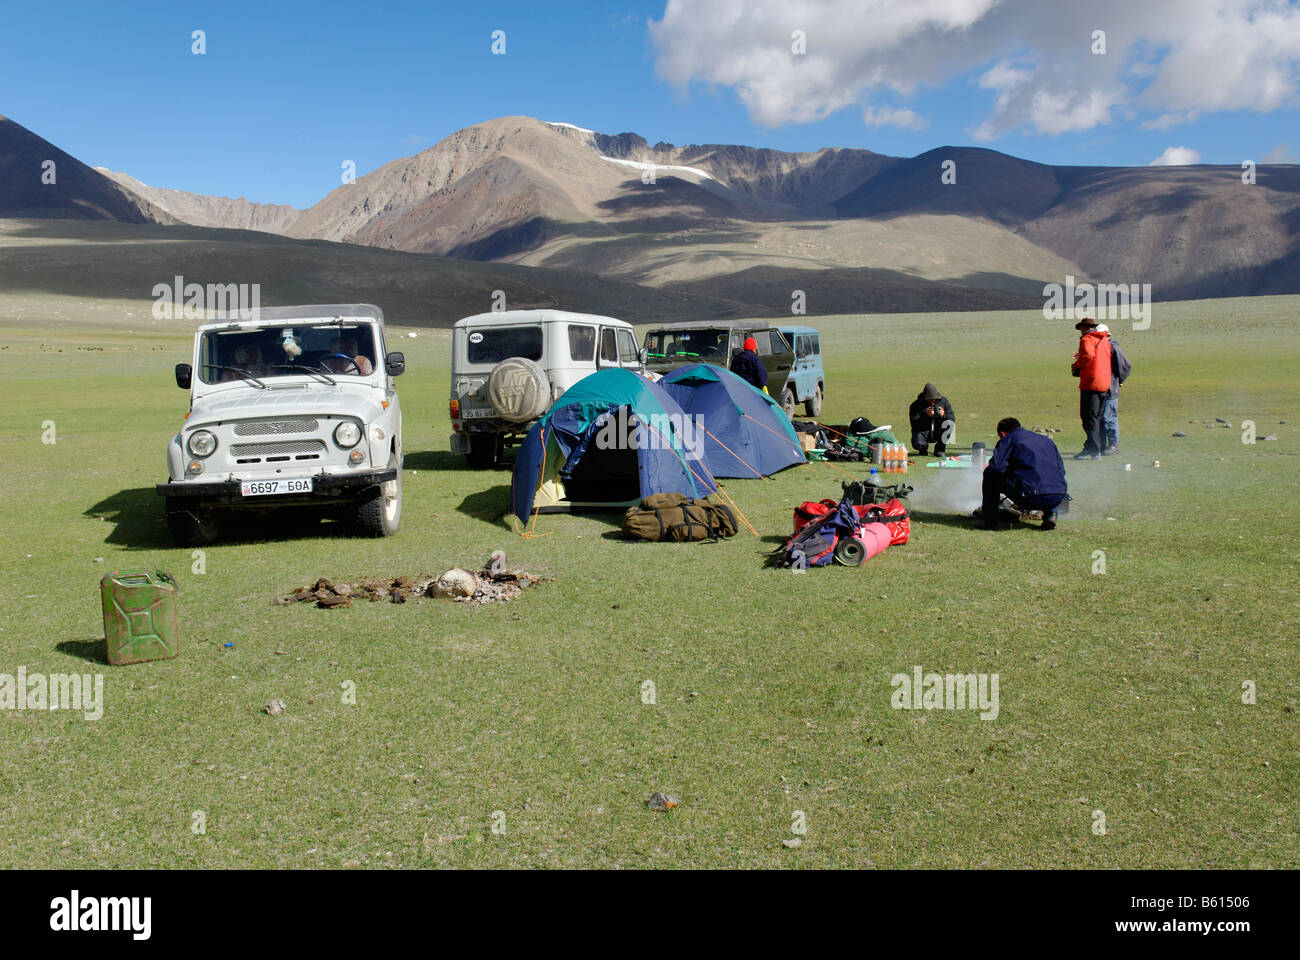 Tourist camp with tents and jeeps, Altai, Mongolia, Asia Stock Photo